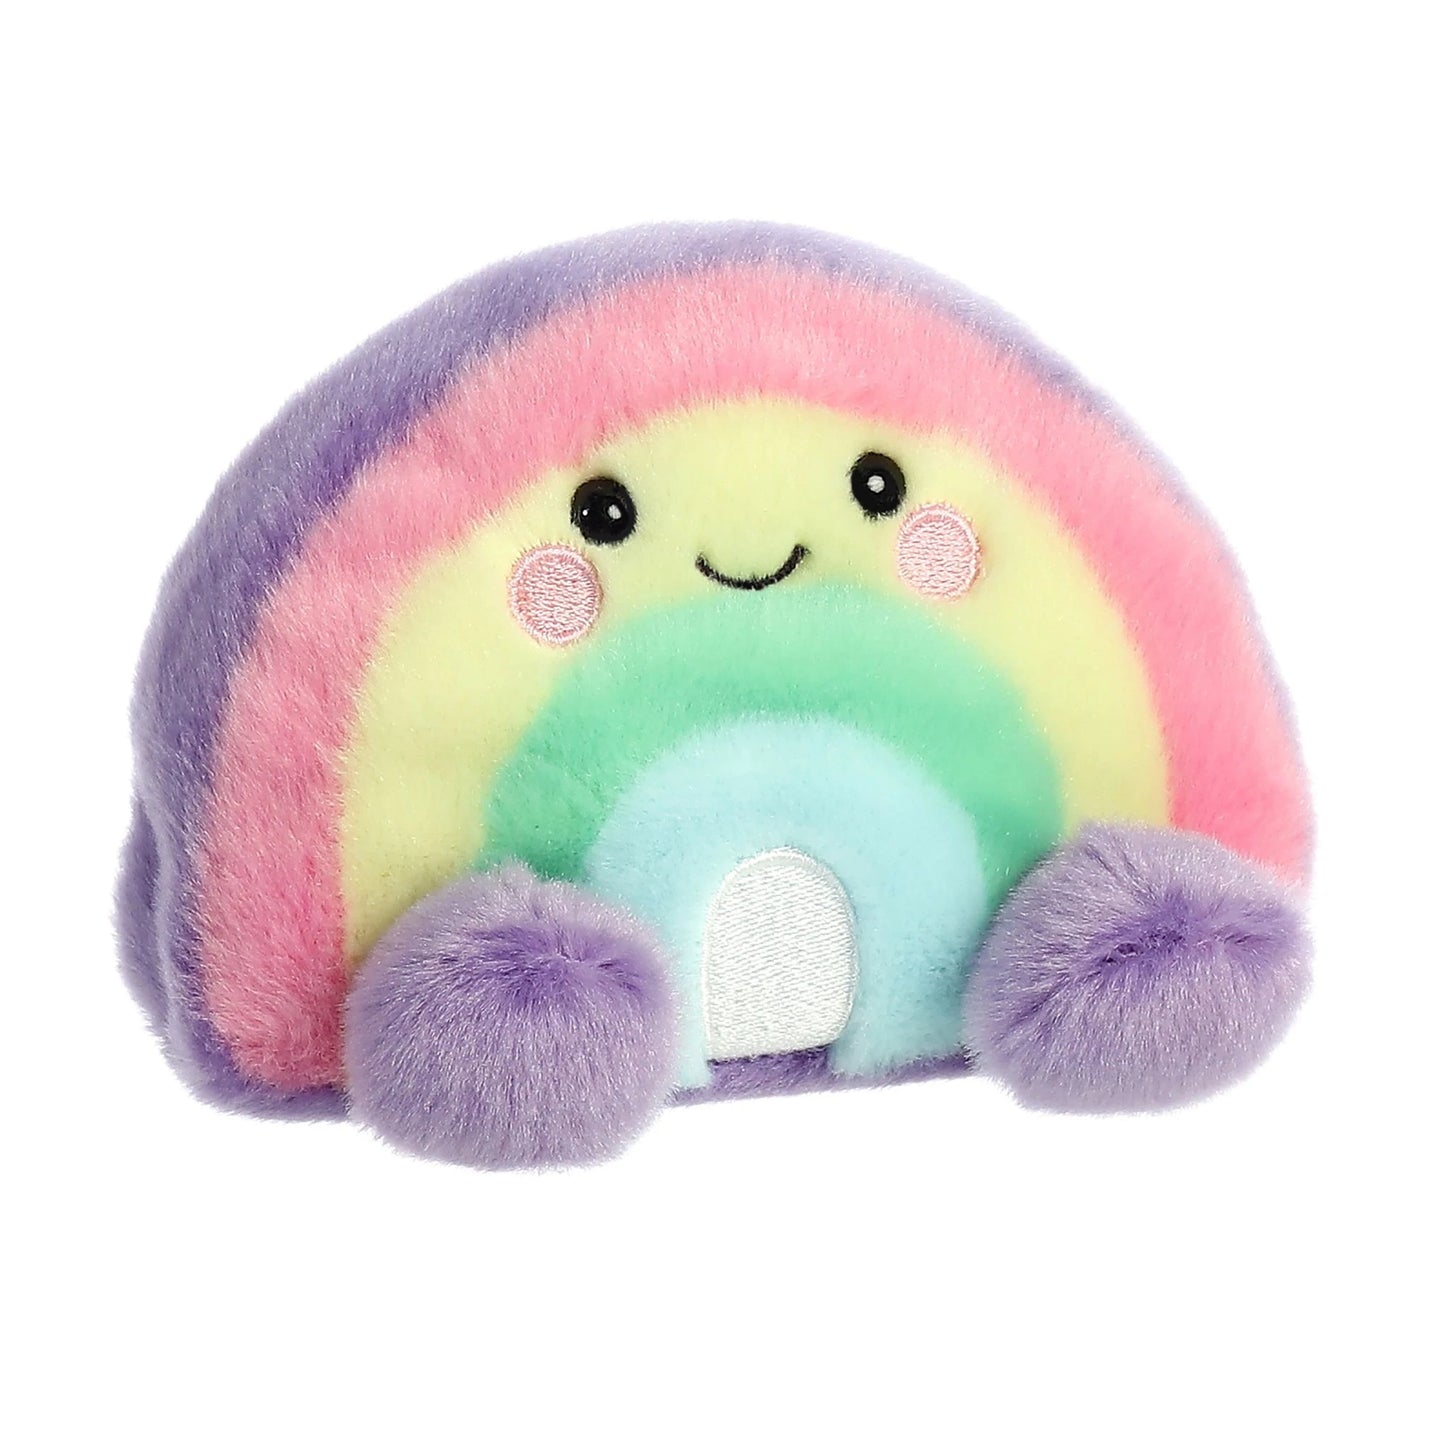 Shining brightly with every color in the rainbow, Vivi is a friend that will show you all the positives and clear skies ahead. Befriend Vivi today.  How I was made:  I am 5 inches in size. I'm made from high quality materials for a soft, fluffy touch. I hold bean pellets suitable for all ages to ensure my quality and stability.